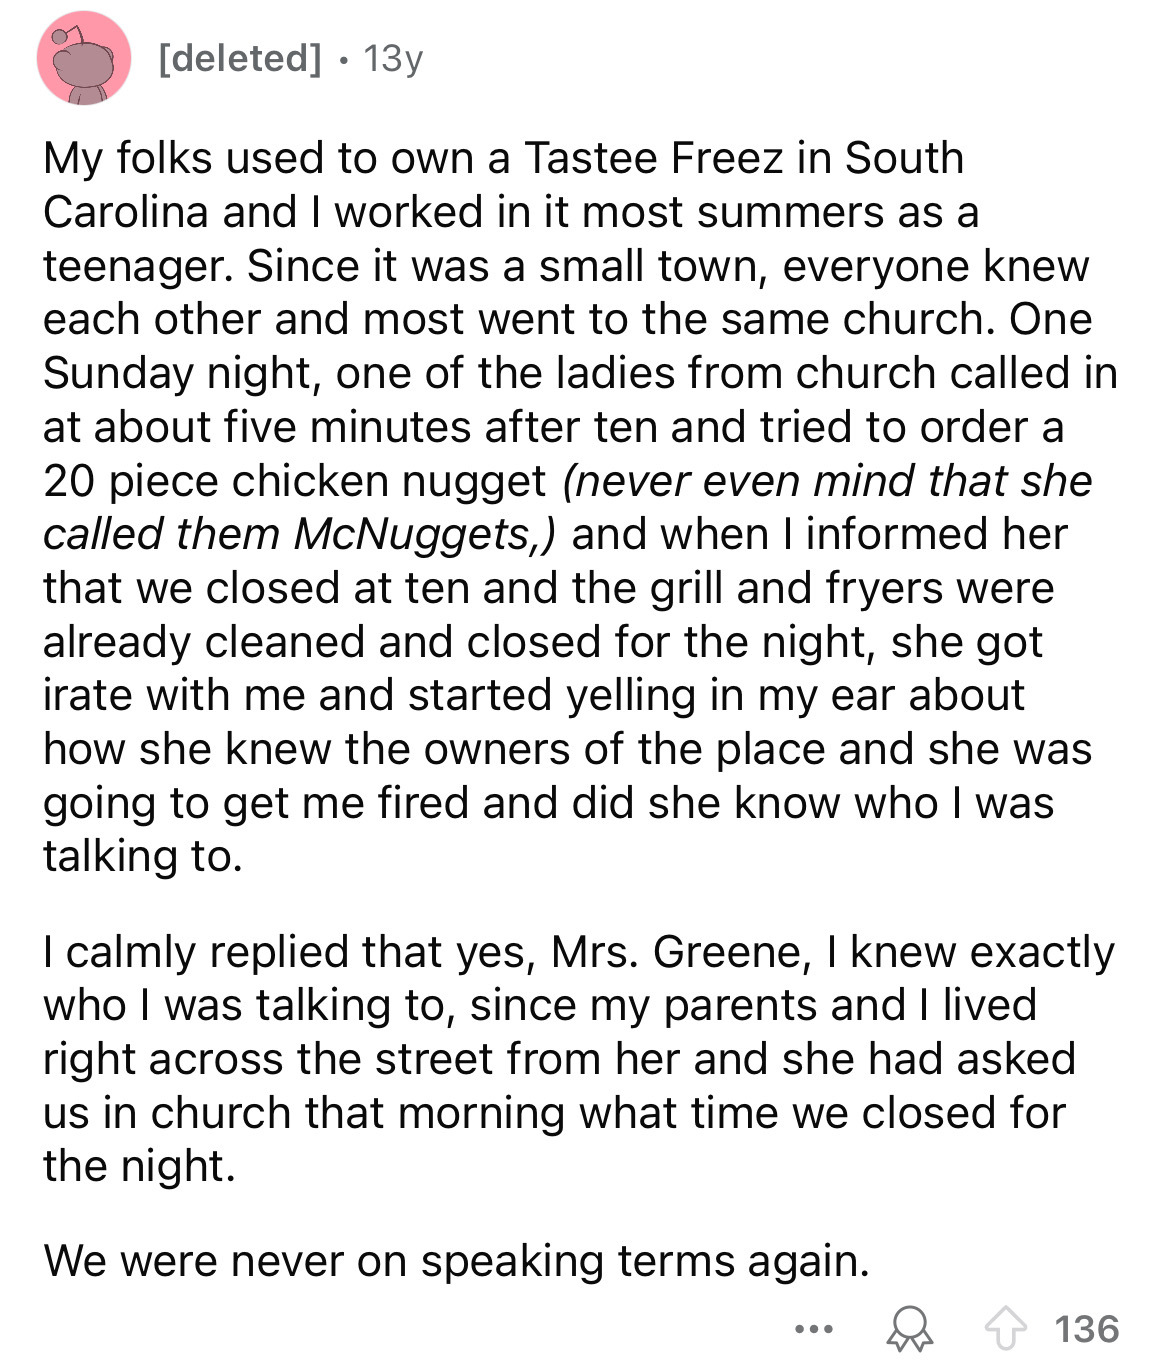 document - deleted 13y My folks used to own a Tastee Freez in South Carolina and I worked in it most summers as a teenager. Since it was a small town, everyone knew each other and most went to the same church. One Sunday night, one of the ladies from chur